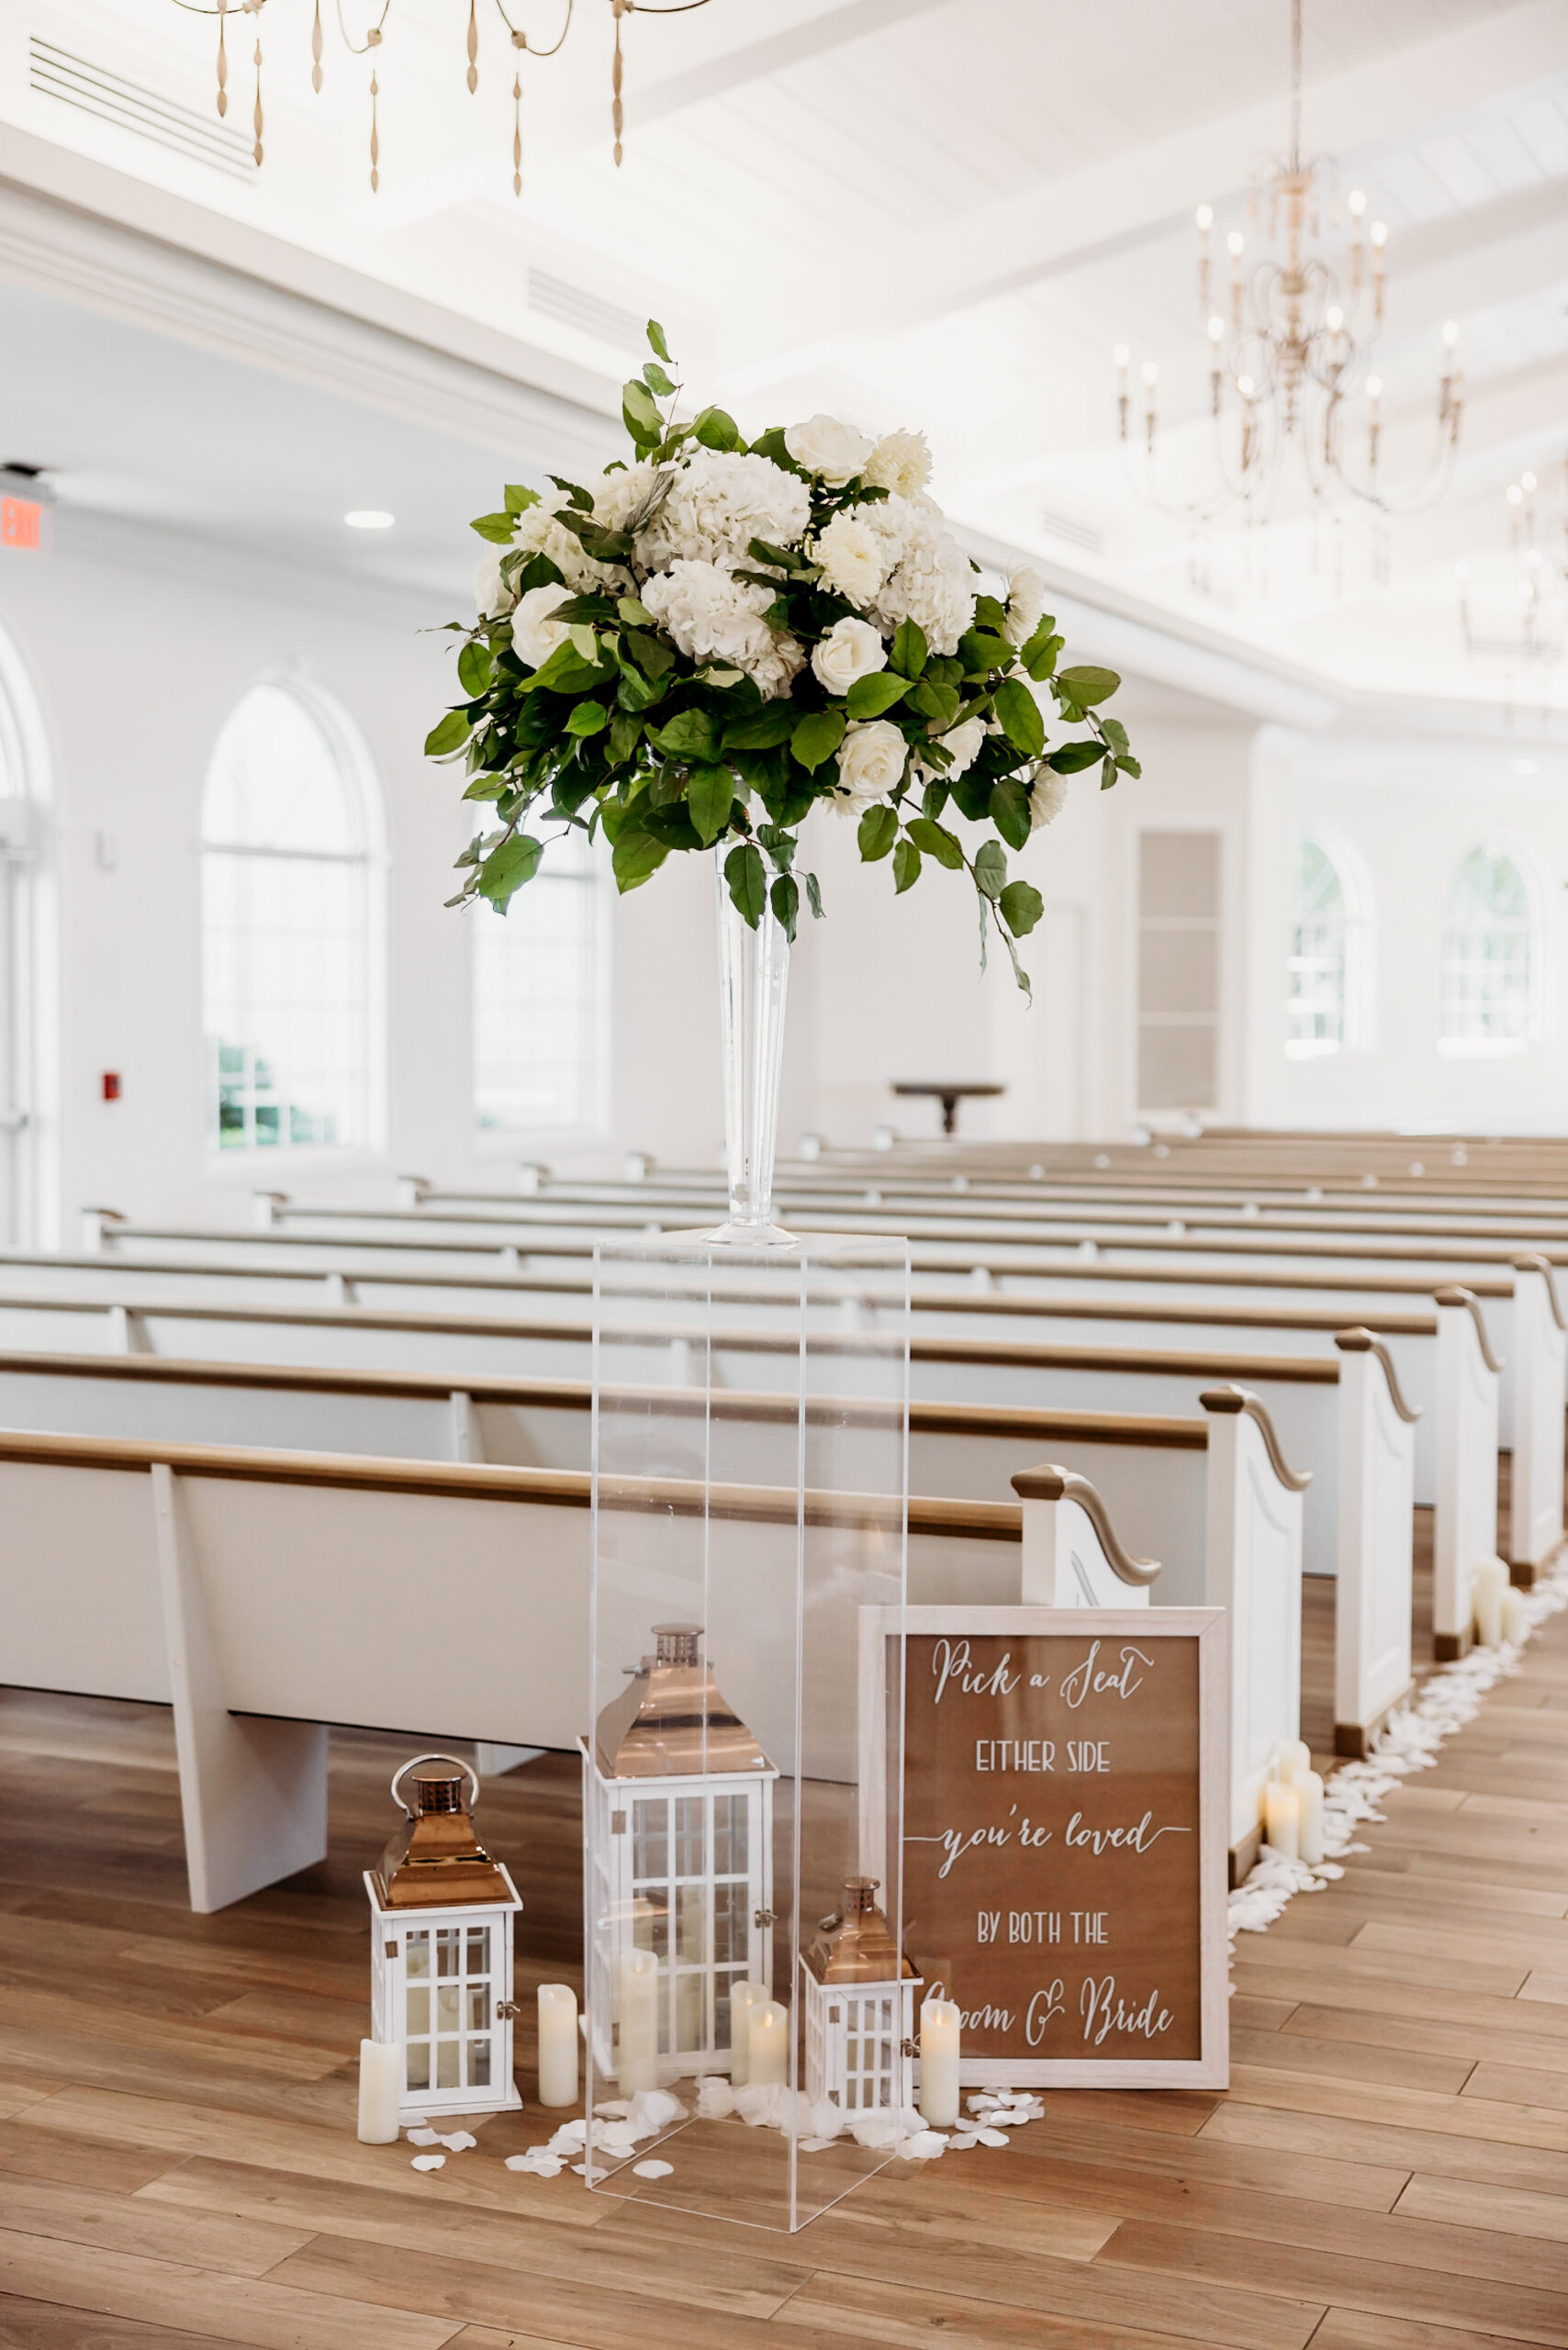 Winter Inspired Wedding Ceremony Decor, Acrylic Stand with Greenery and White Hydrangeas Floral Arrangement, White and Copper Lanterns, Wooden Pick a Seat Sign | Safety Harbor Traditional Wedding Ceremony Venue Harborside Chapel | St. Pete Wedding Planner MDP Events Planning